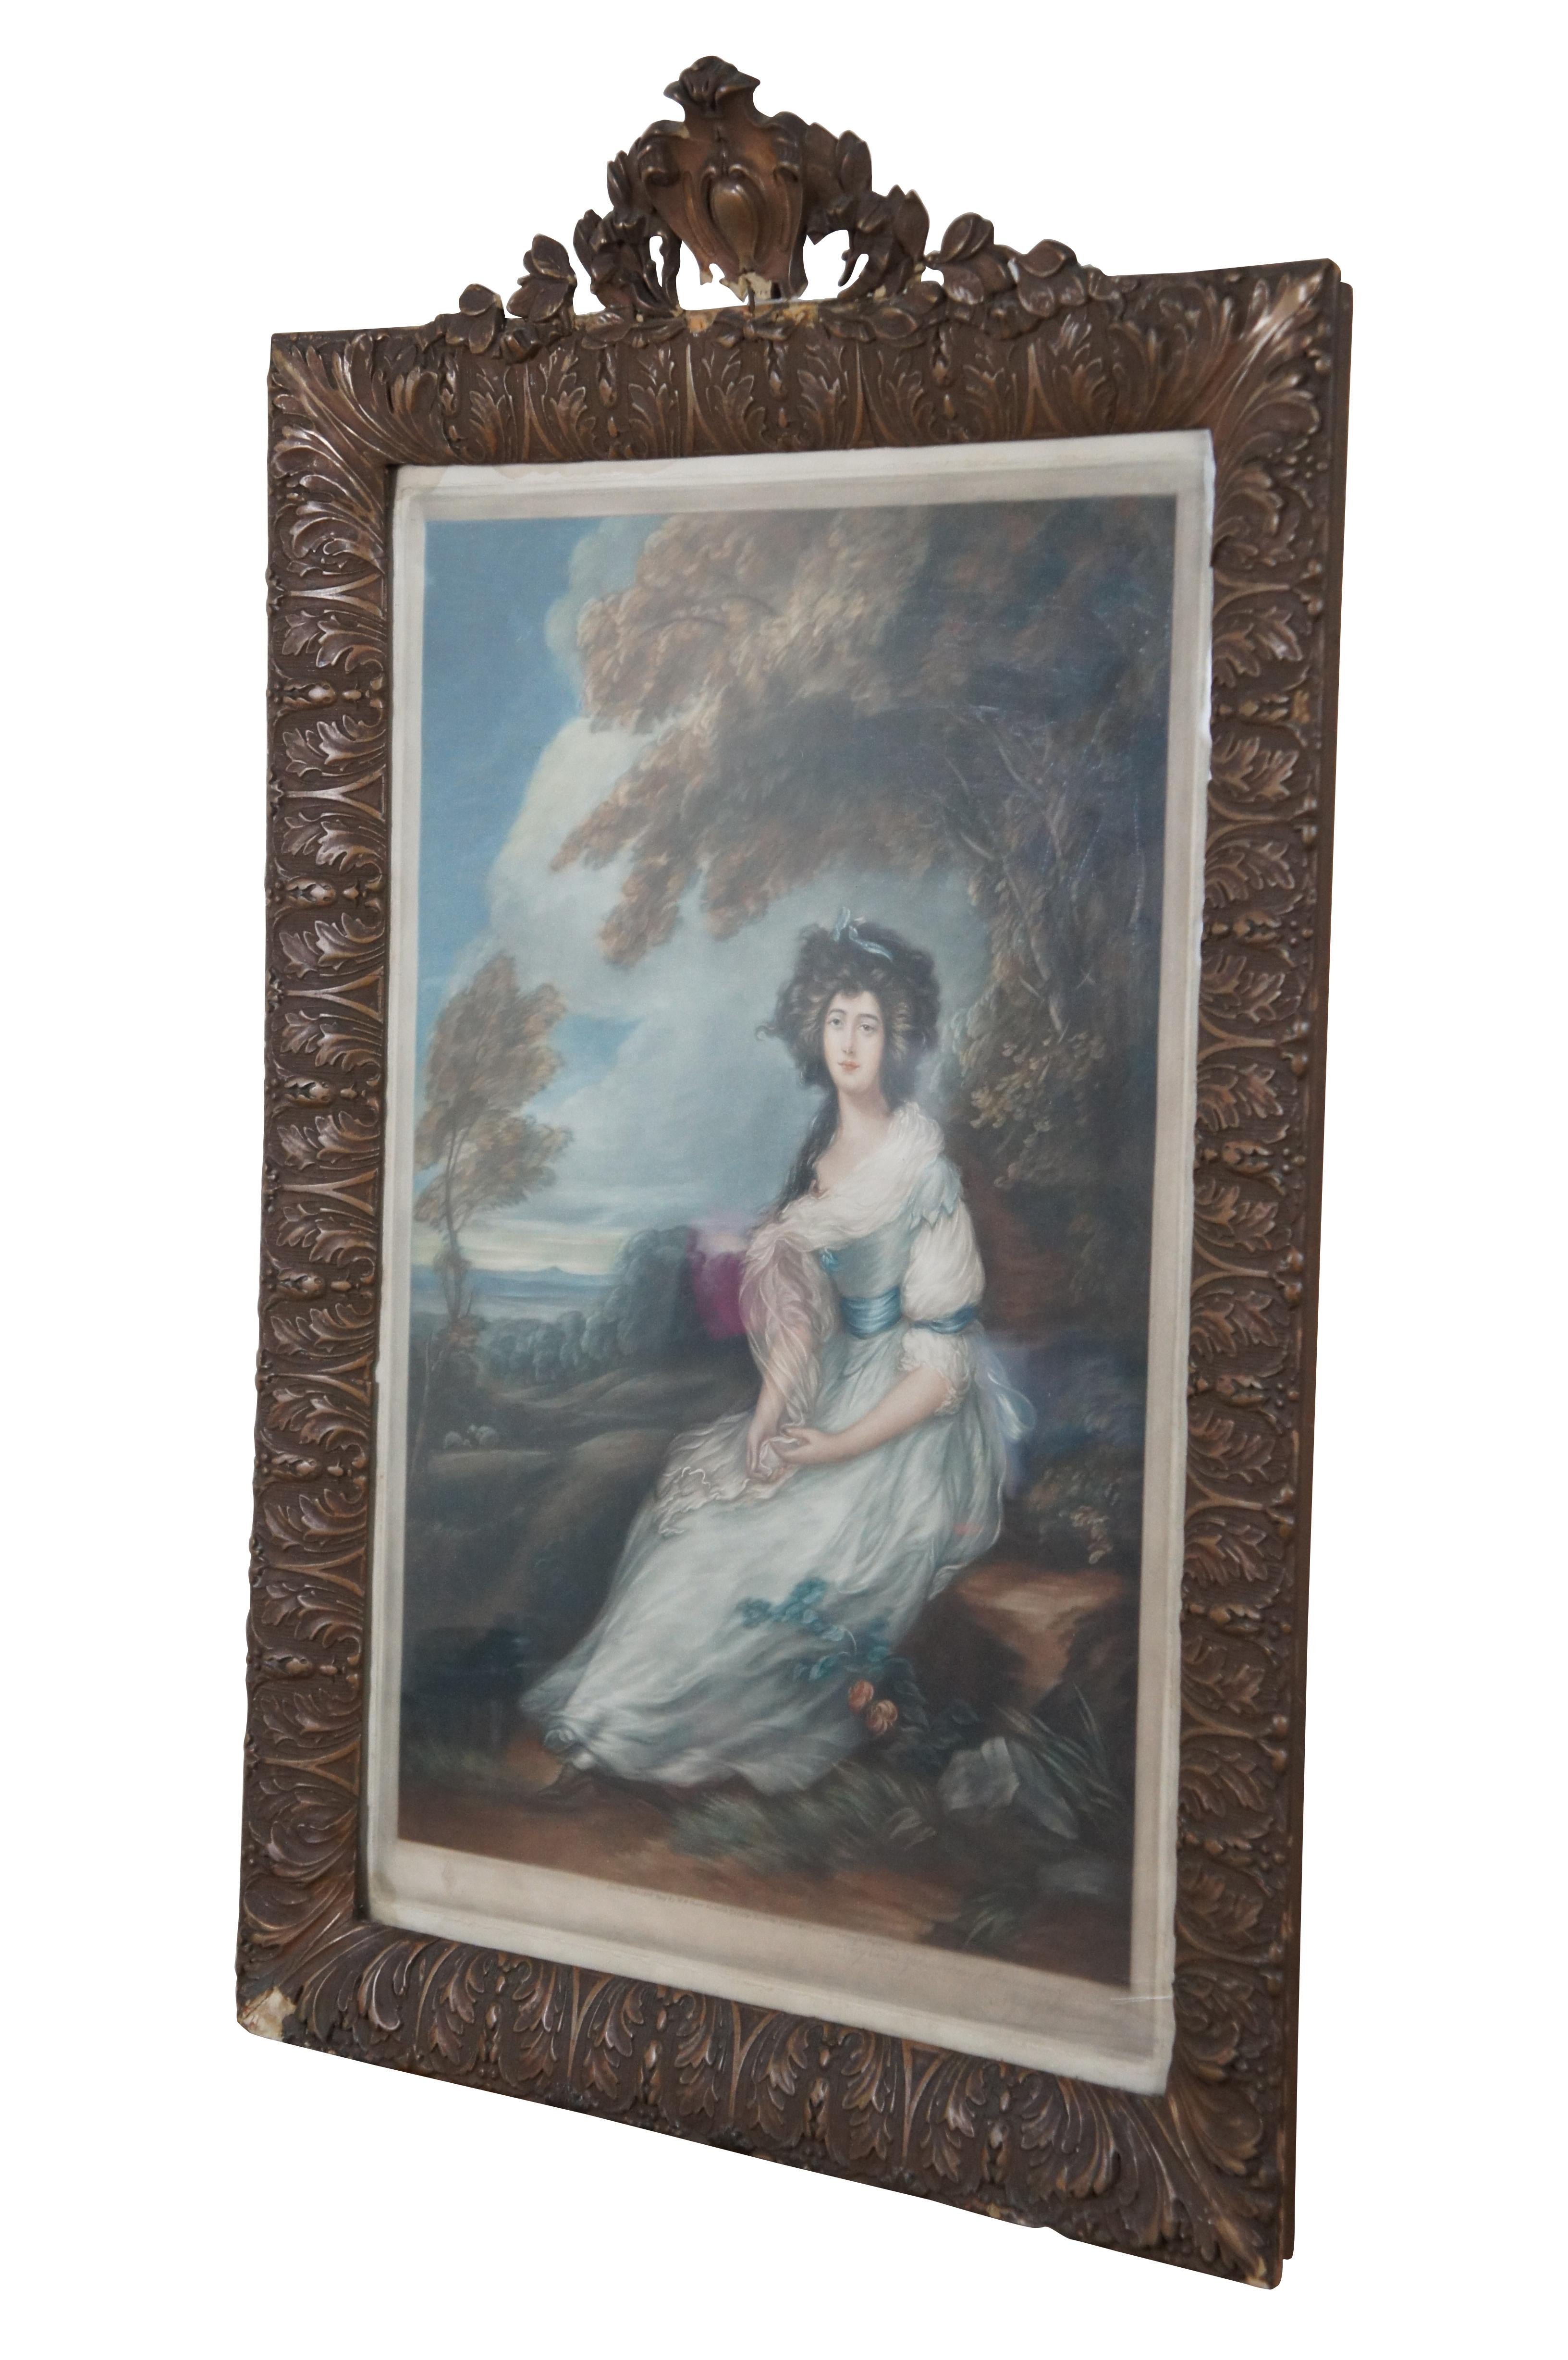 Antique colored Mezzotint engraving portrait of Mrs. Richard Brinsley Sheridan by Thomas Gainsborough, published in 1909 by W.M. Power of London. A penciled note and signature in the lower right reads “Engraved + printed in colors (word unclear)